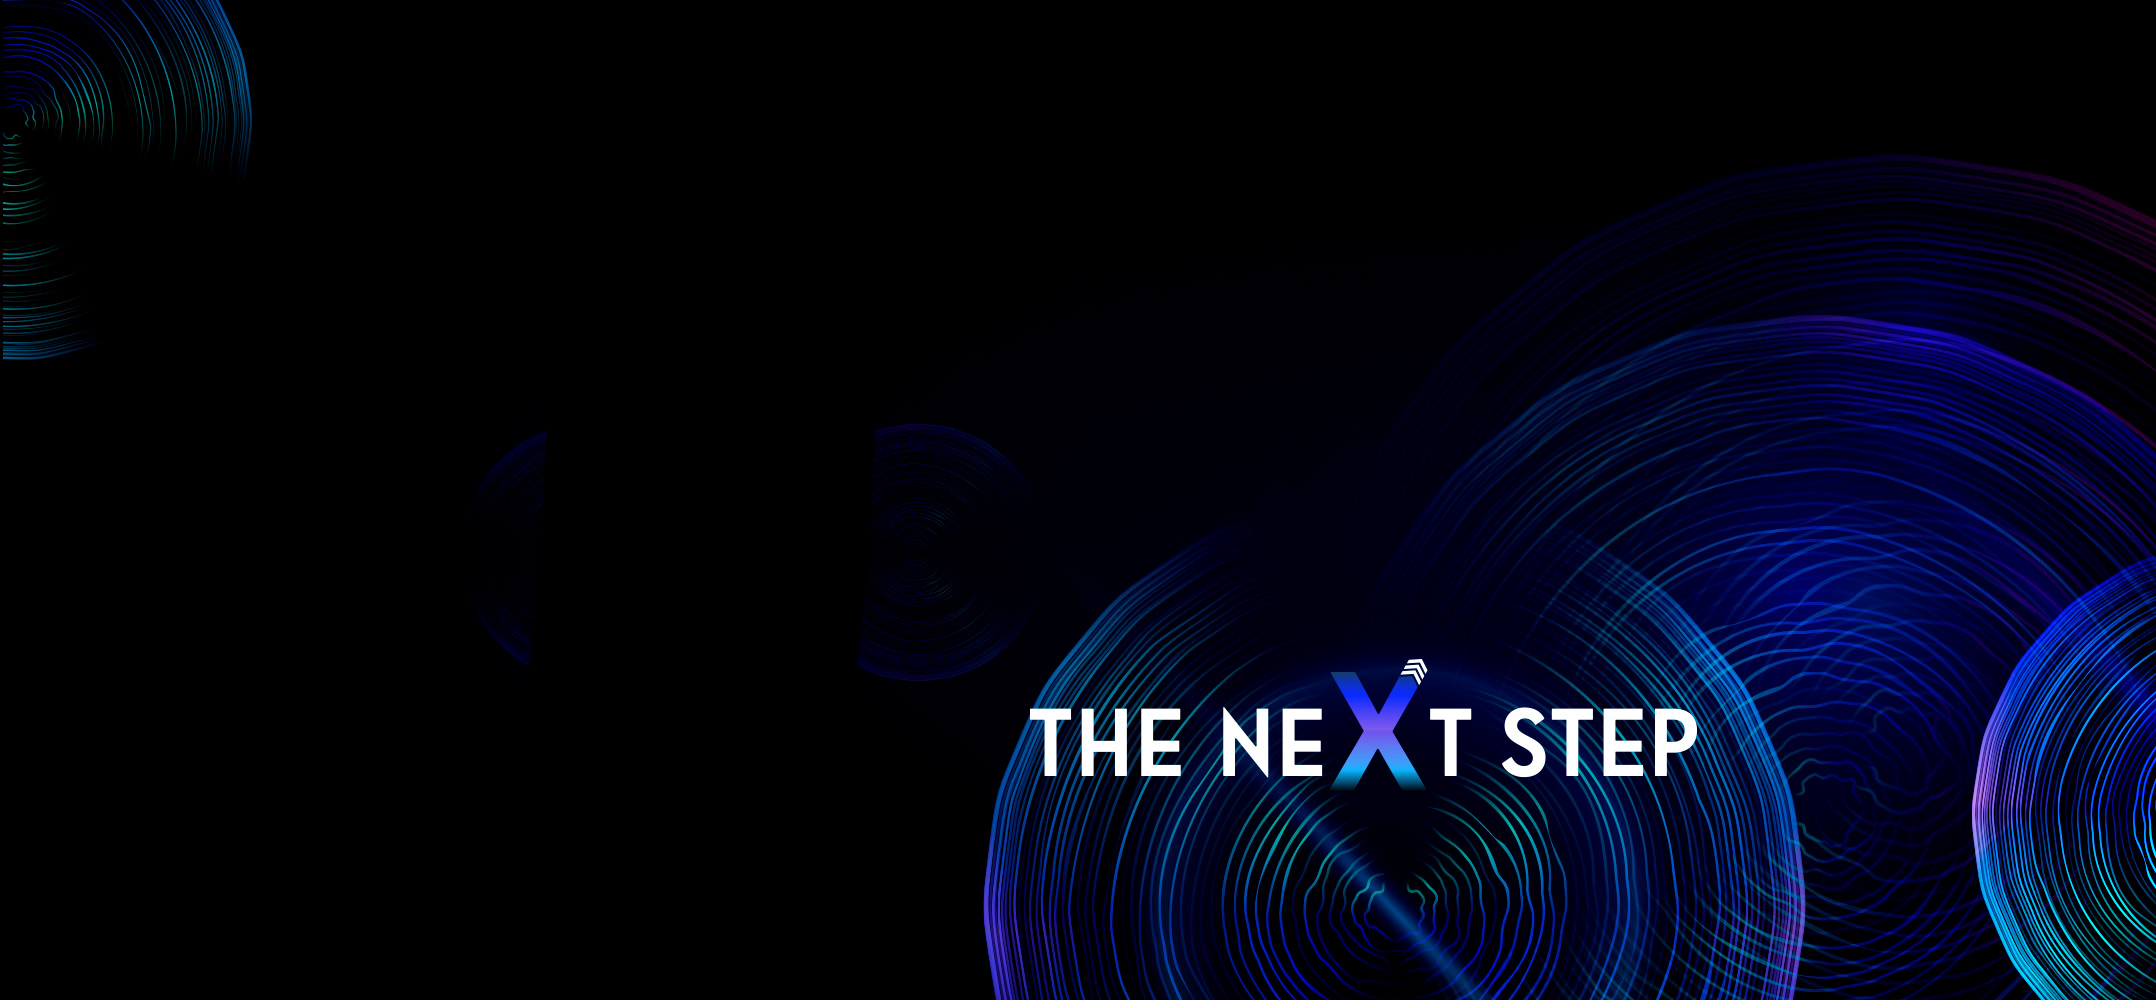 THE NEXT STEP powered by DRACOON